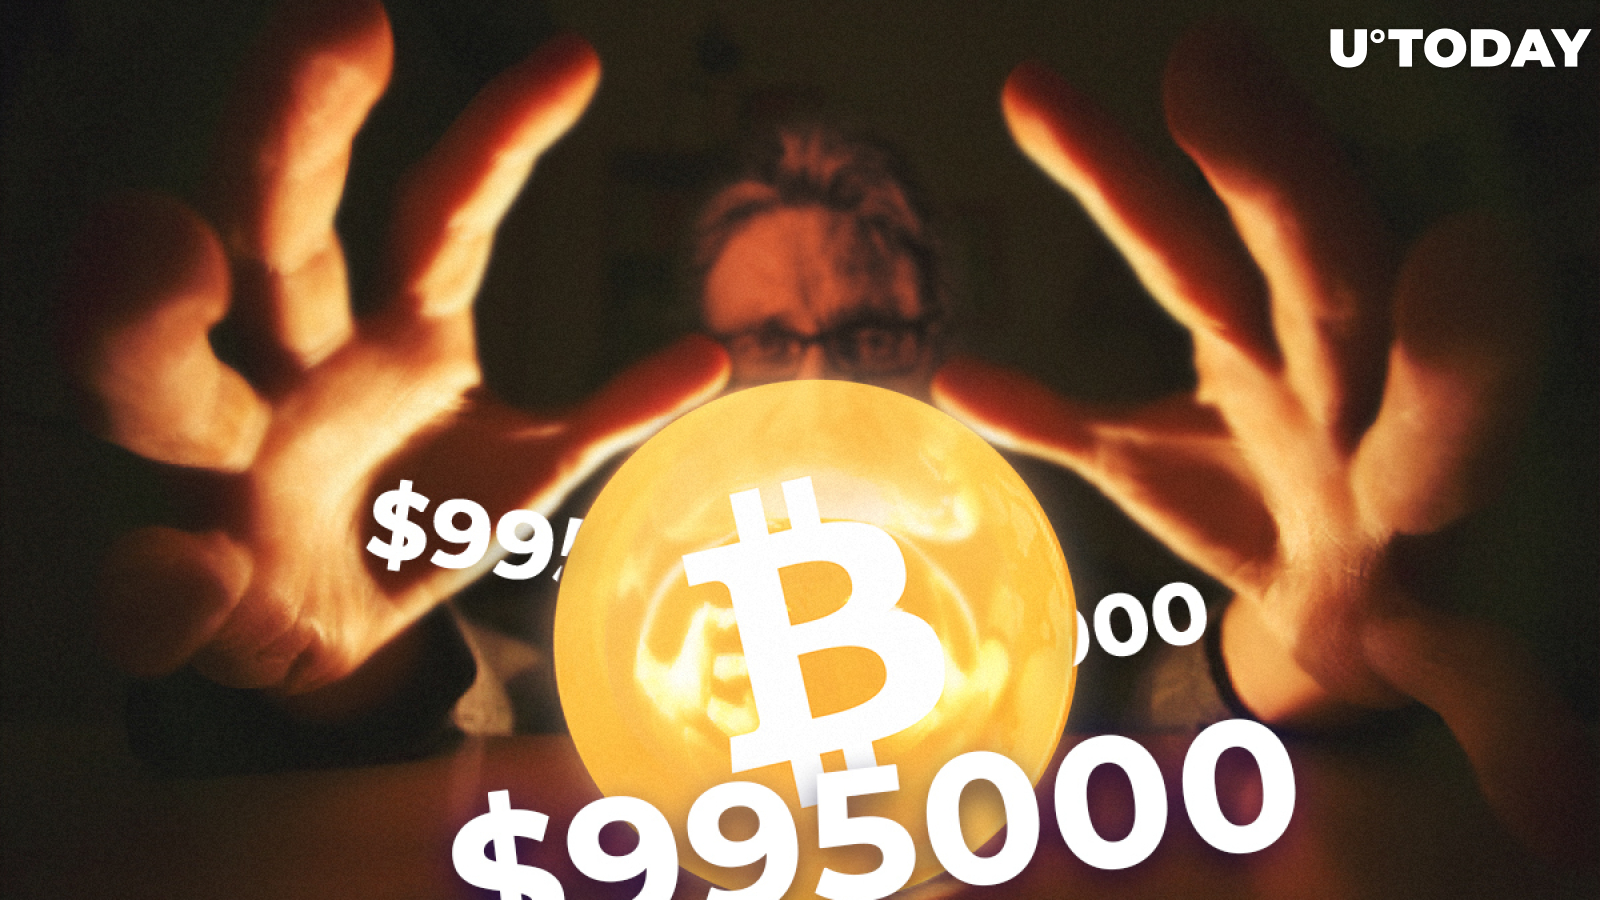 BTC Price Prediction: Bitcoin Is to Hit Another $995,000 for McAfee’s Prediction to Come True